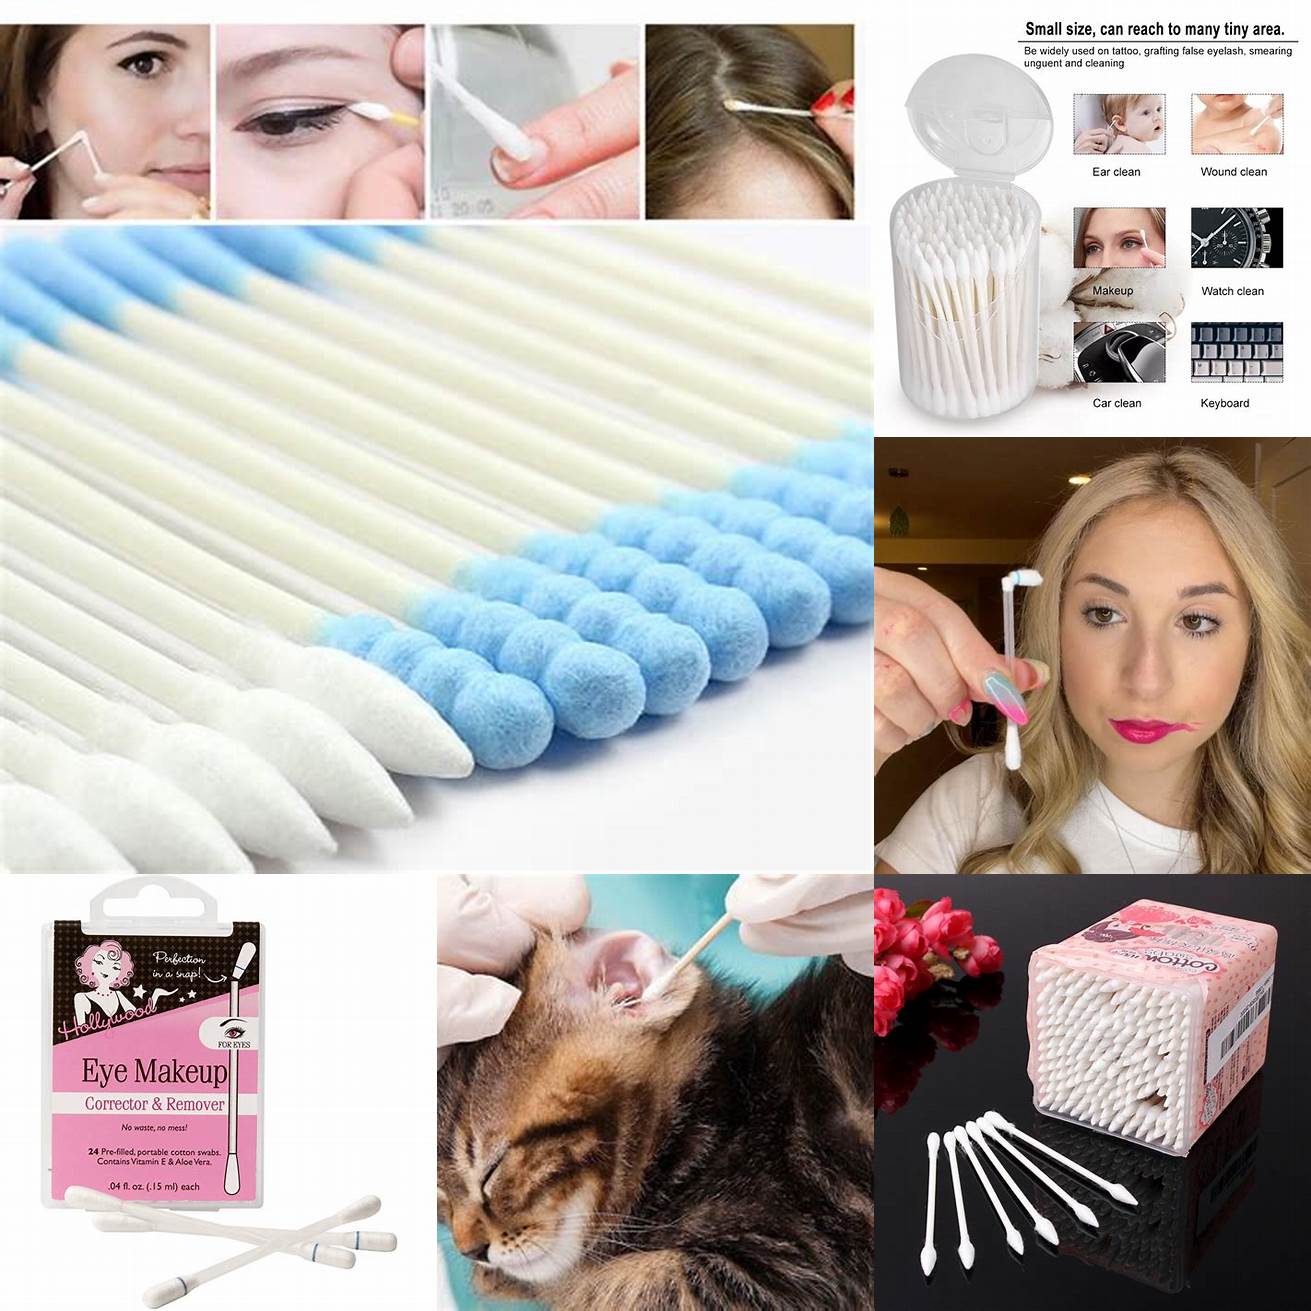 Clean up any mistakes with a cotton swab dipped in makeup remover